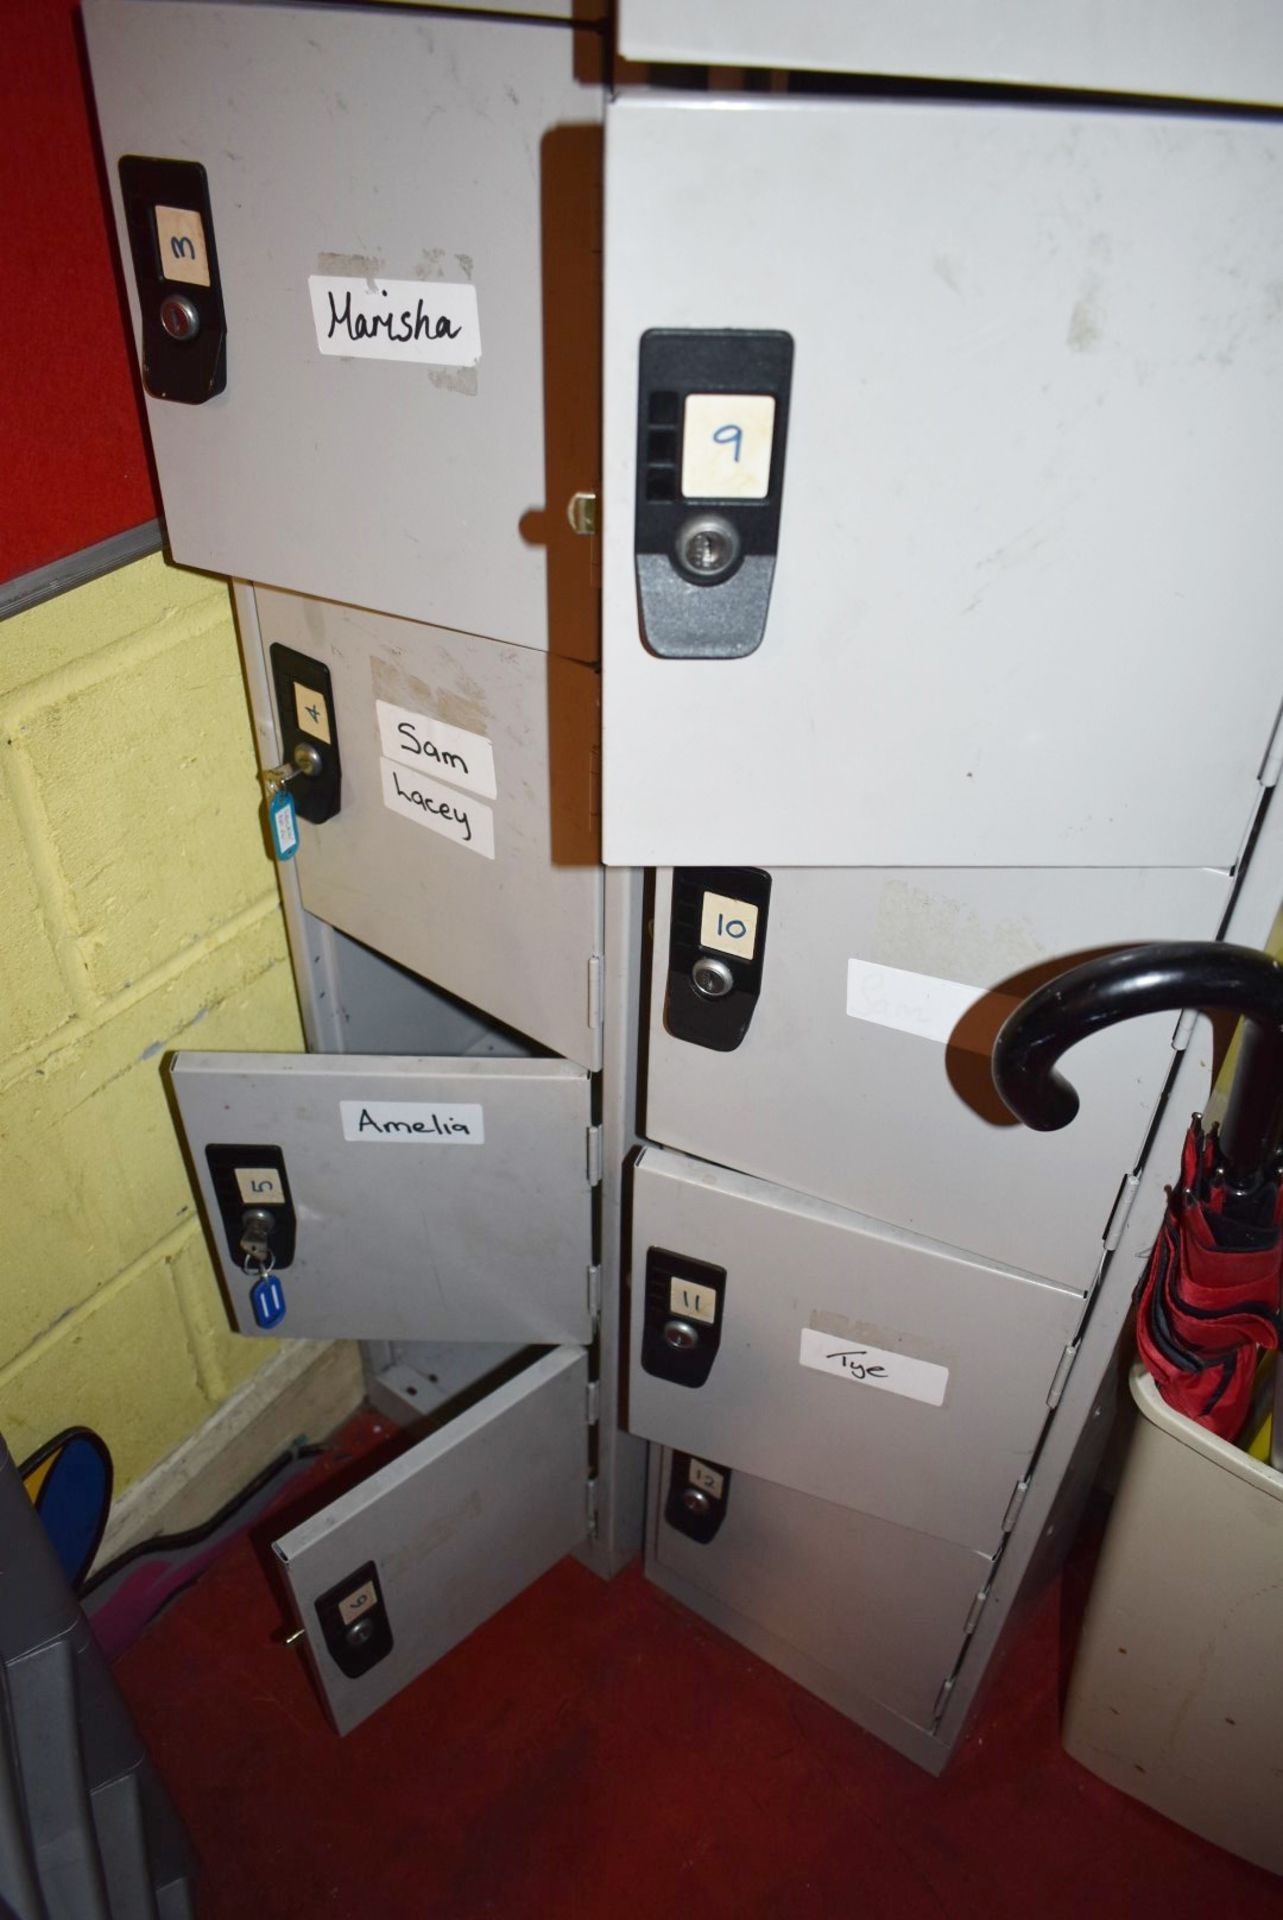 3 x Upright Staff Lockers - Some With Keys - Ref WW361 - CL520 - Location: London W10 More pictures, - Image 2 of 4